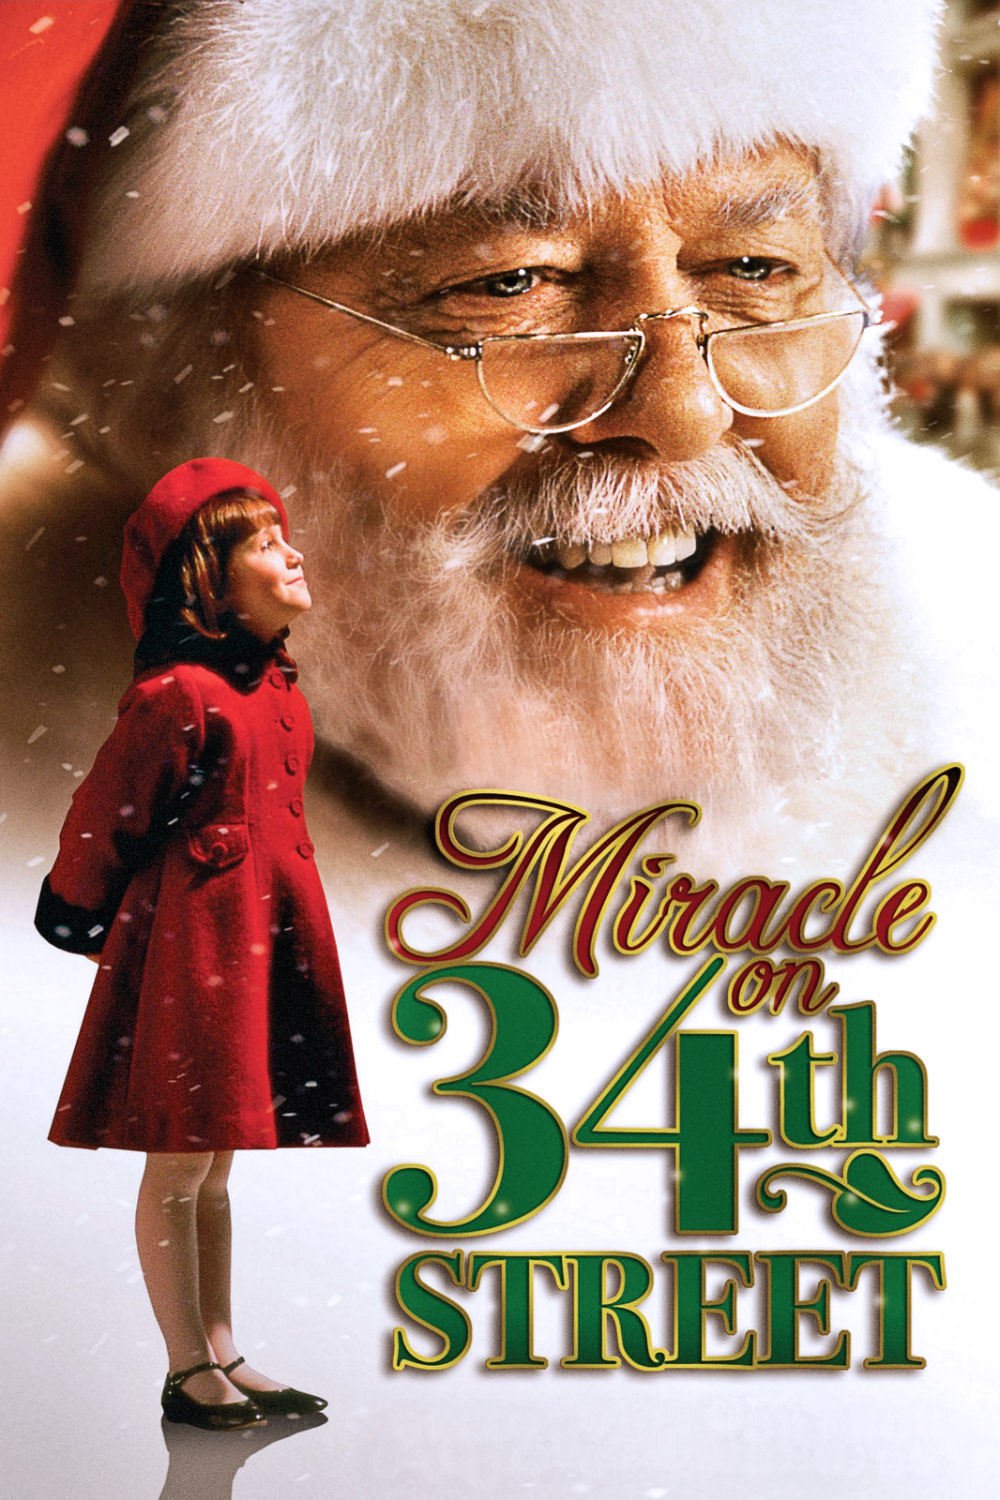 Poster for the movie "Miracle on 34th Street"